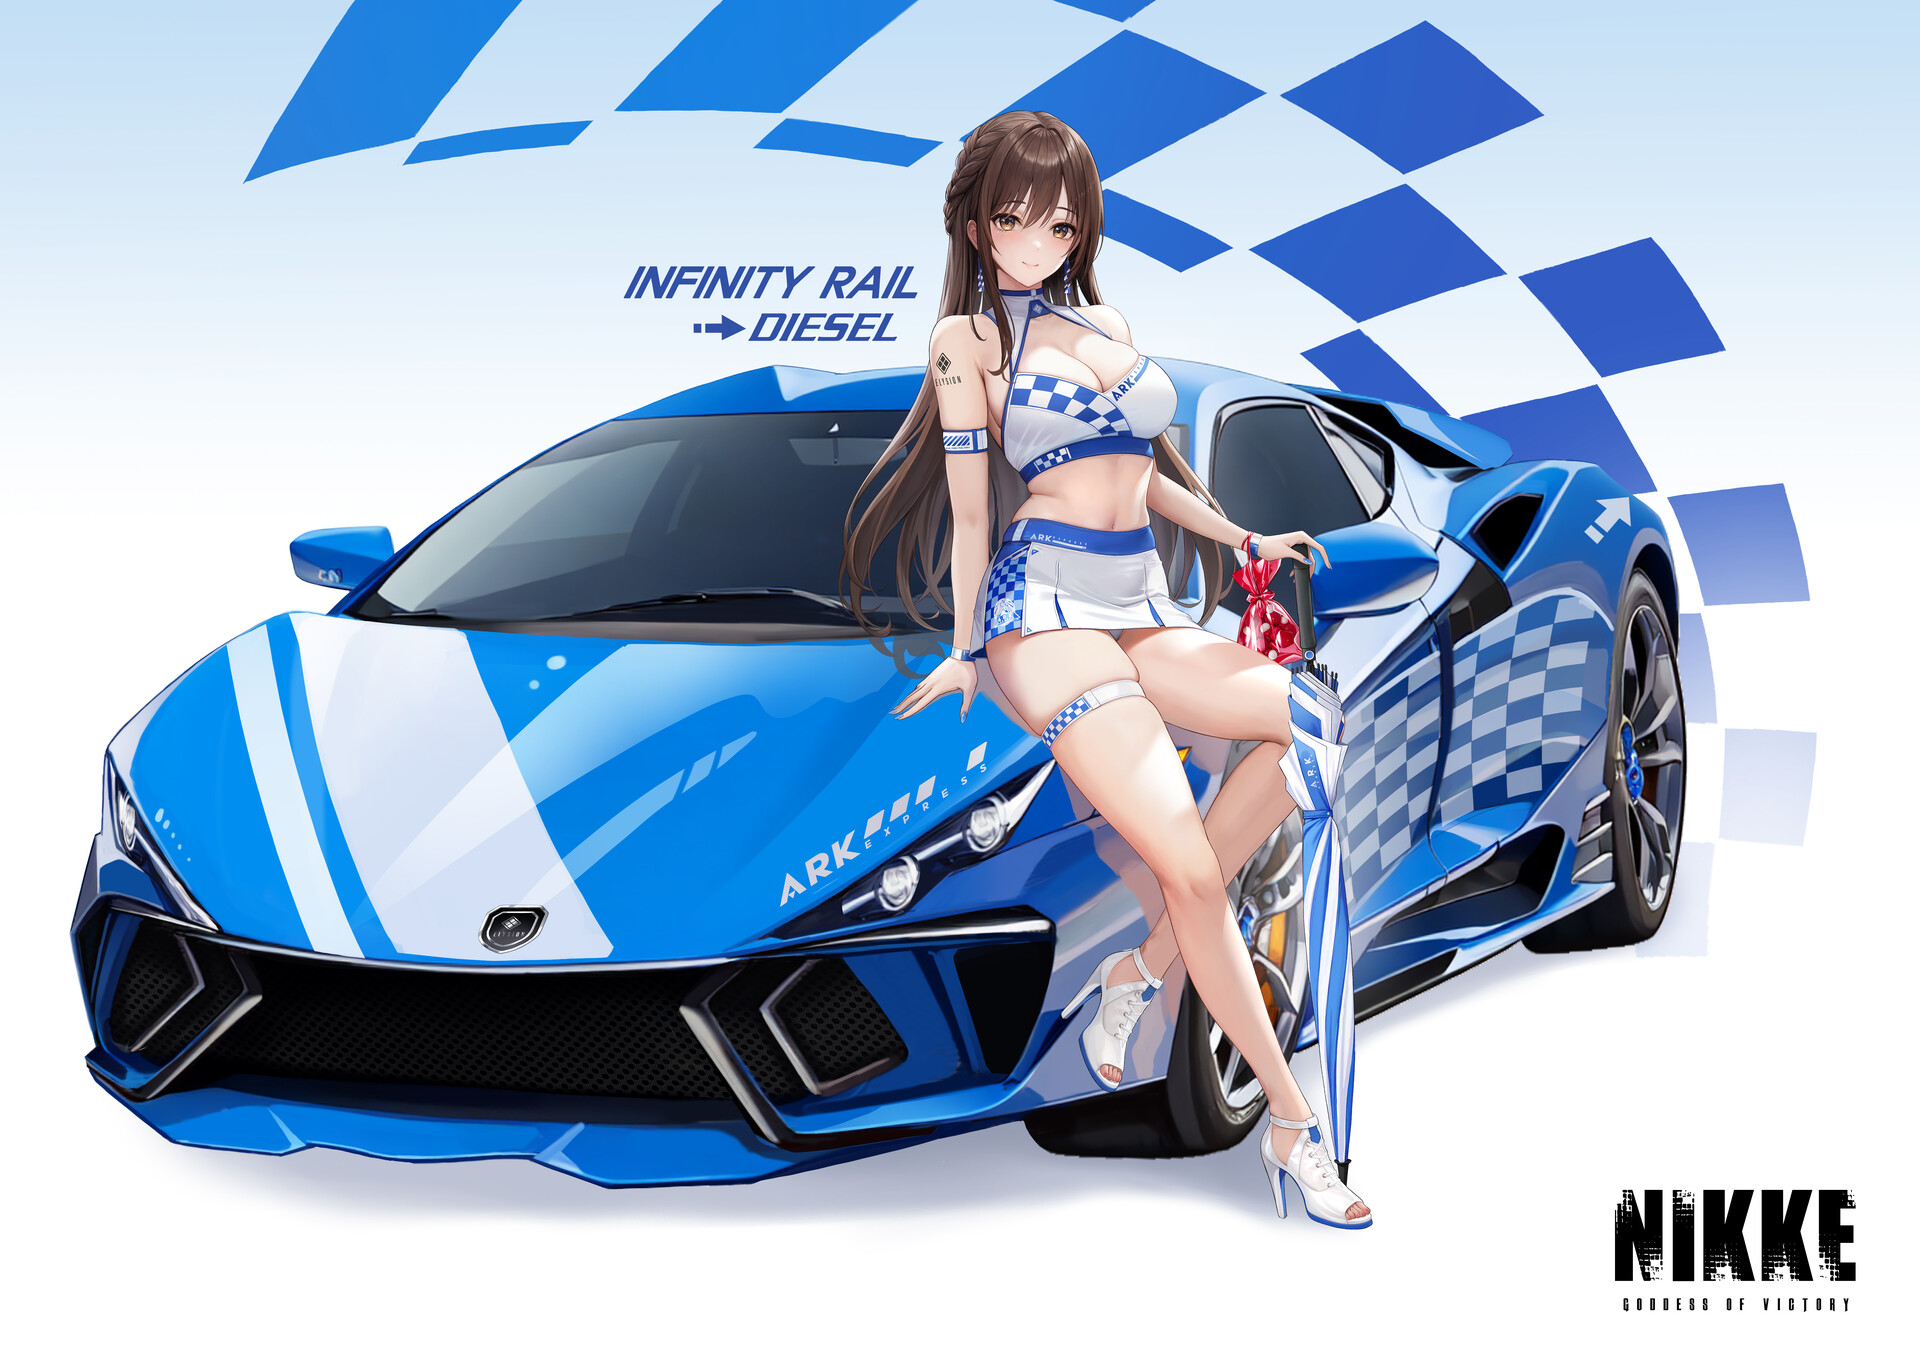 Anime 1920x1369 DramZ drawing women brunette long hair blue white car anime girls skimpy clothes umbrella belly cleavage race cars Nikke: The Goddess of Victory